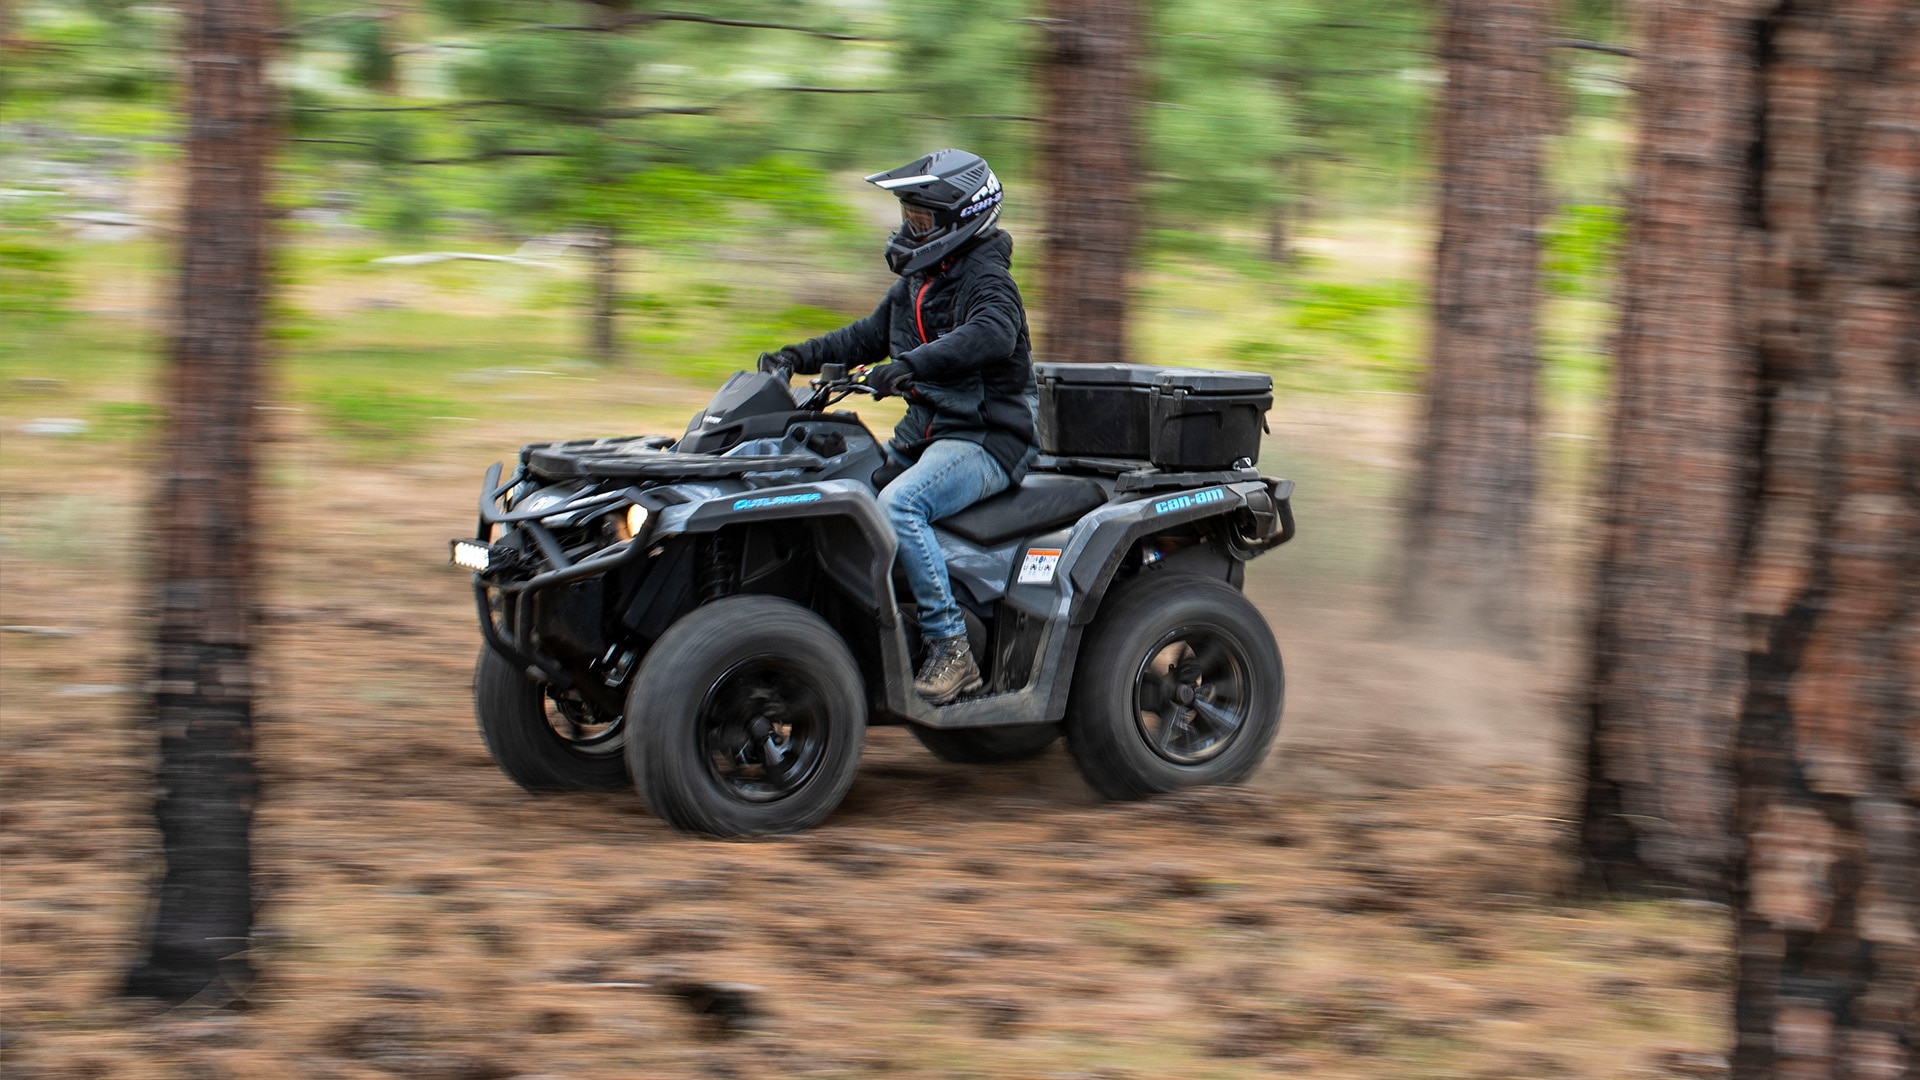 Rider going full speed through a forest on a Can-Am Outlander all terrain vehicle